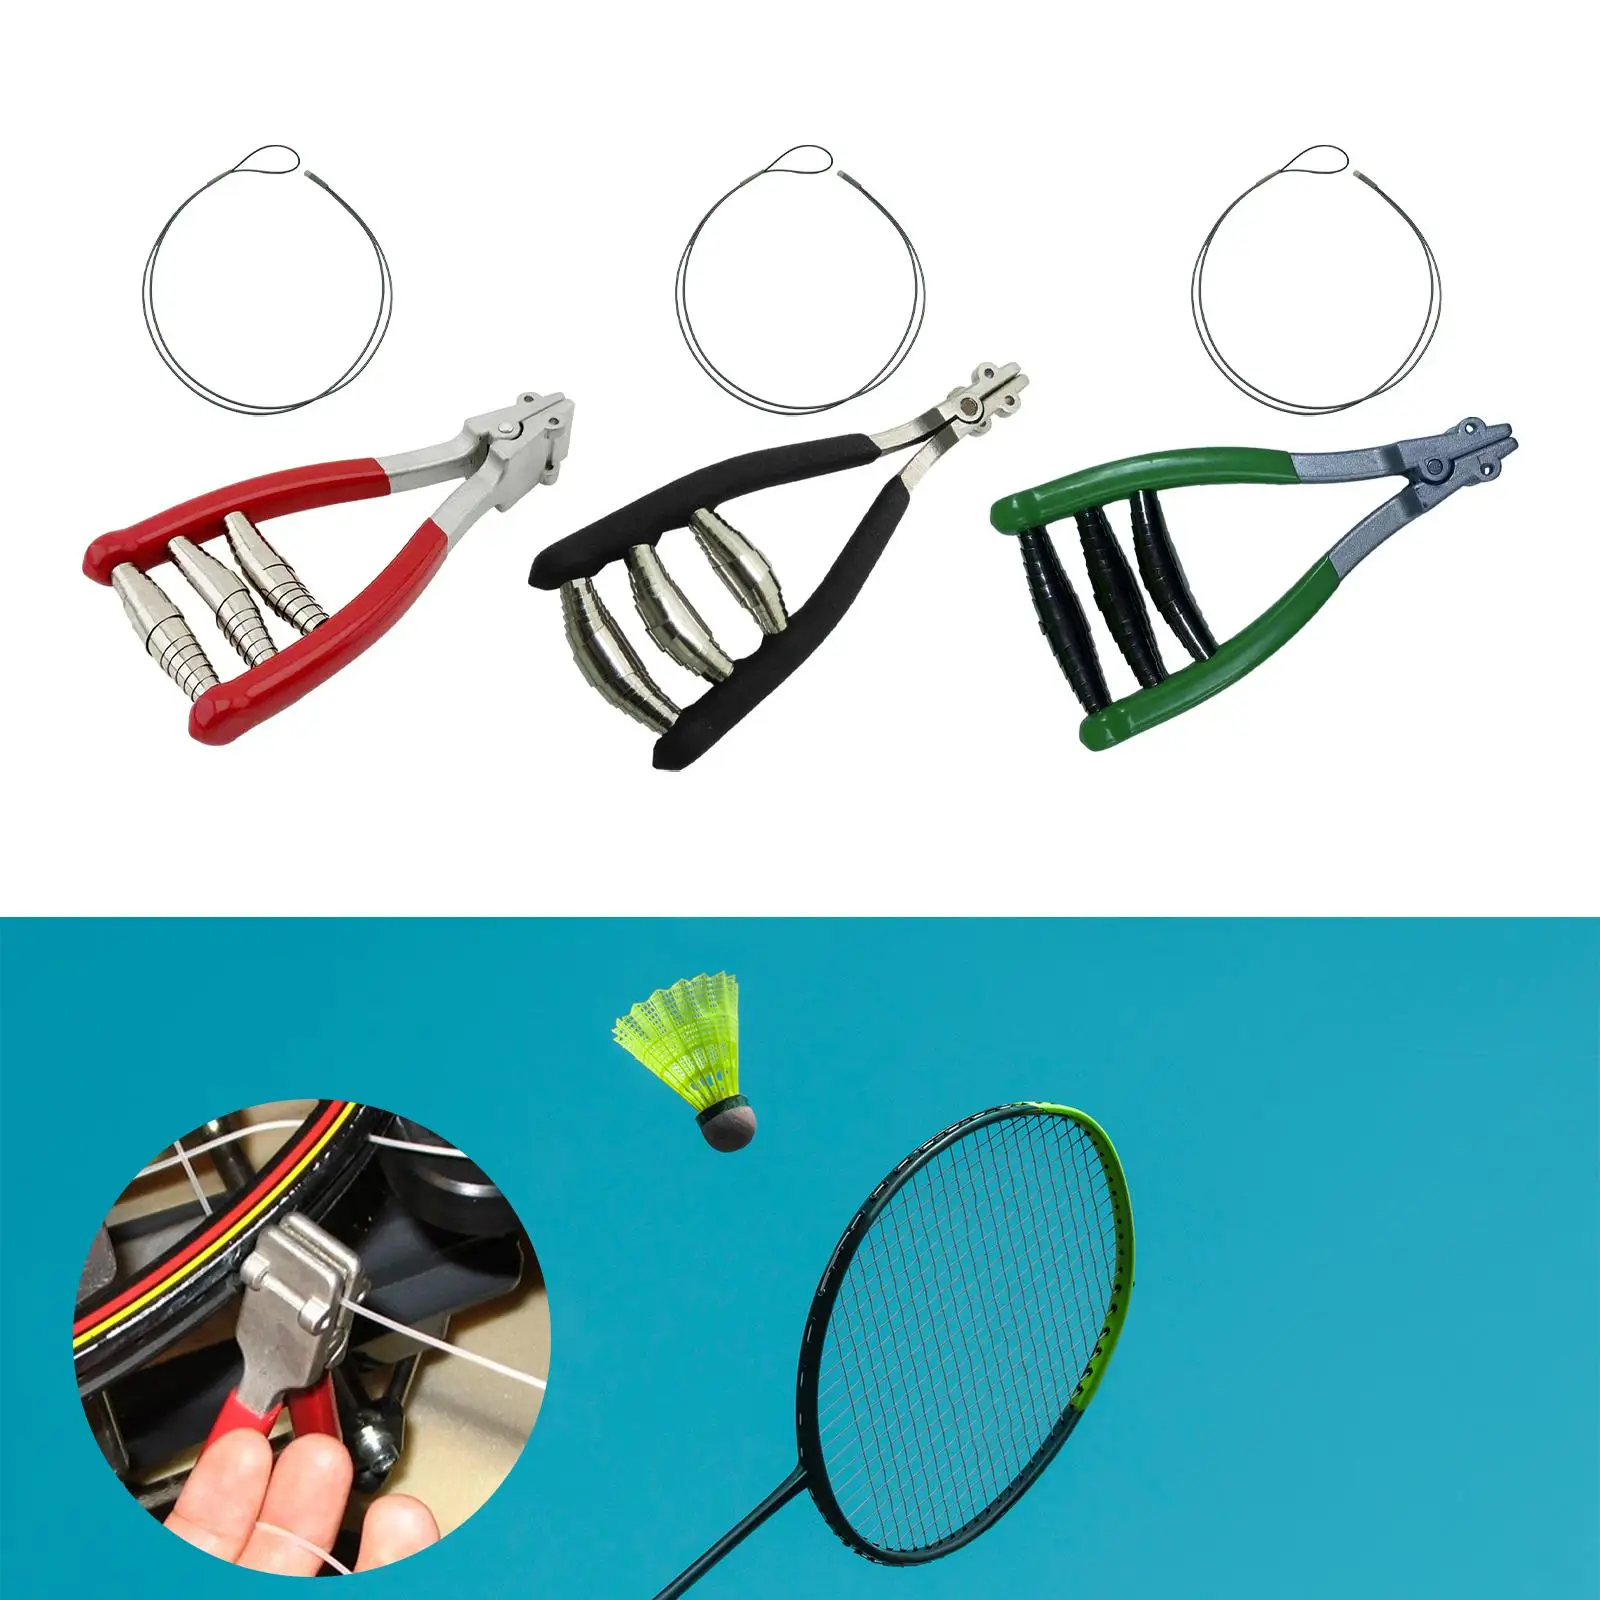 Sports Starting Clamp Stringing Clamp Durable Wide Head 3 Spring Starter Clamp Clamping Tool for Tennis Racquet Squash Badminton